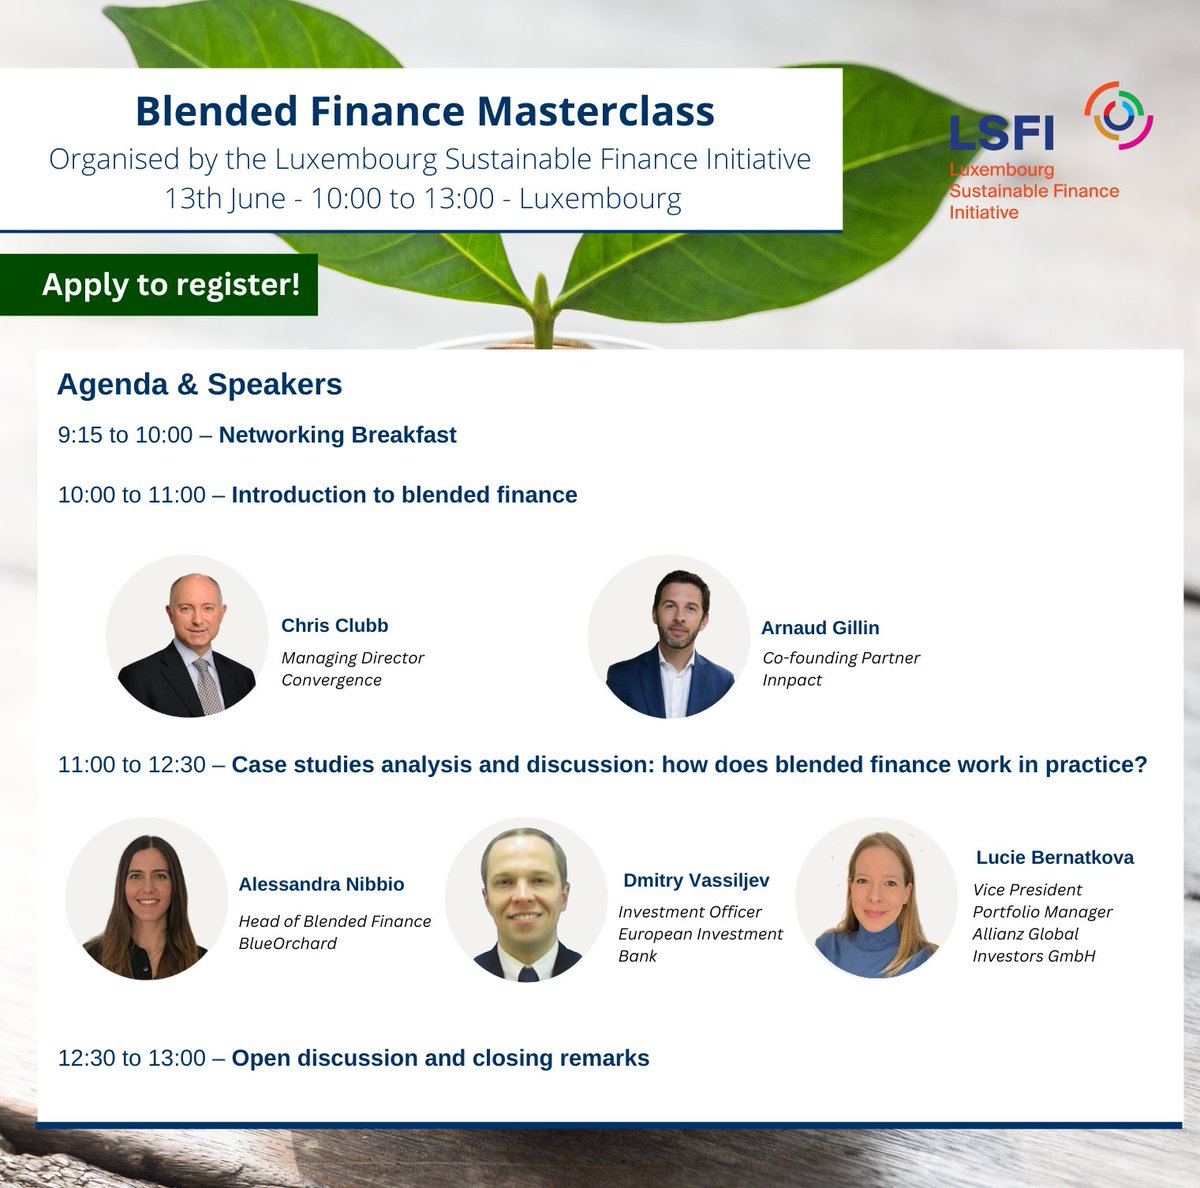 #LastDaysToApply
Are you a Luxembourg finance professional and would like to upskill in #blendedfinance?
Apply to register for our upcoming masterclass on blended finance taking place in #Luxembourg on 13th June from 10:00 to 13:00. 
Deadline: 5th June.
👉🏼lsfi.lu/masterclass-re…